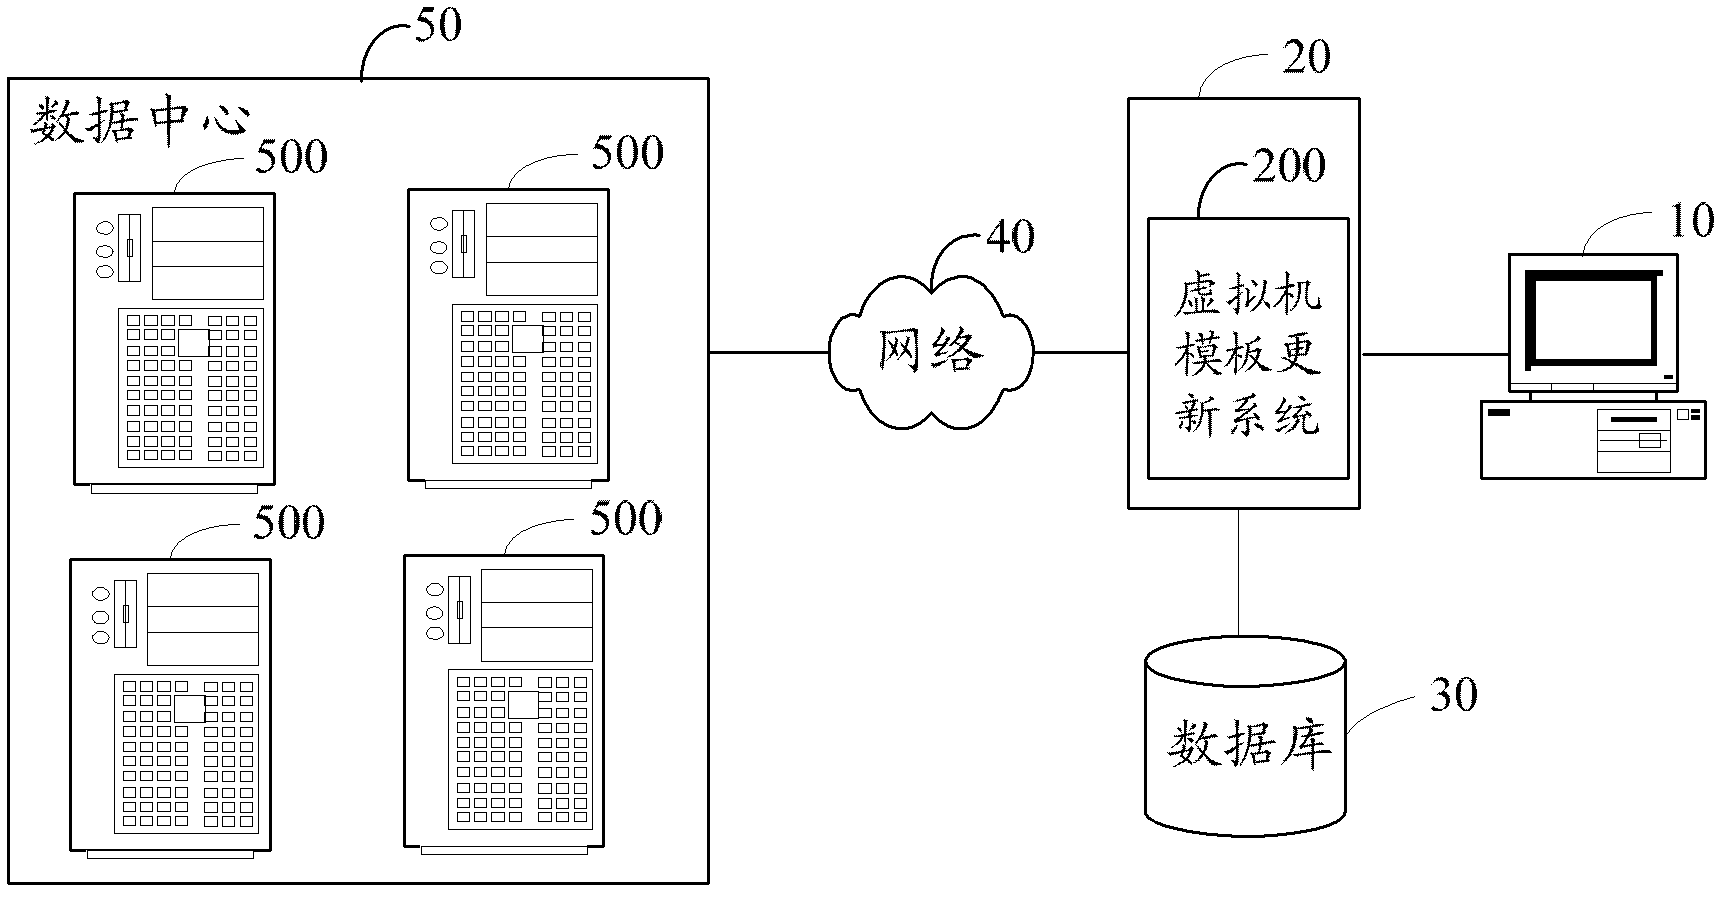 Virtual machine template updating system and method